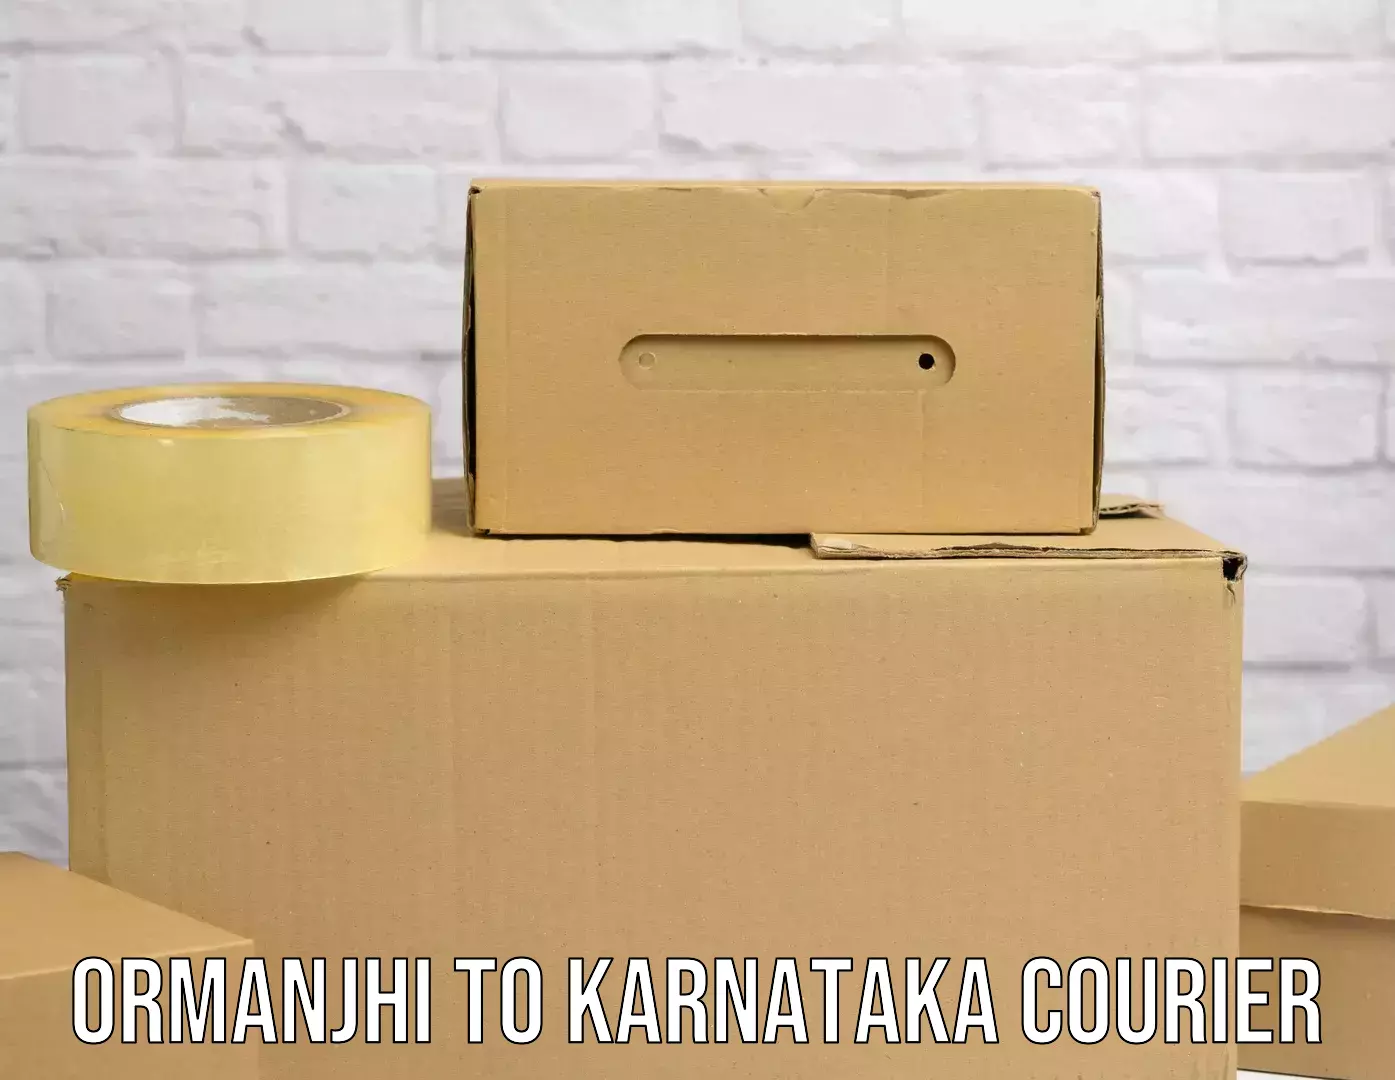 Reliable package handling Ormanjhi to Manipal Academy of Higher Education